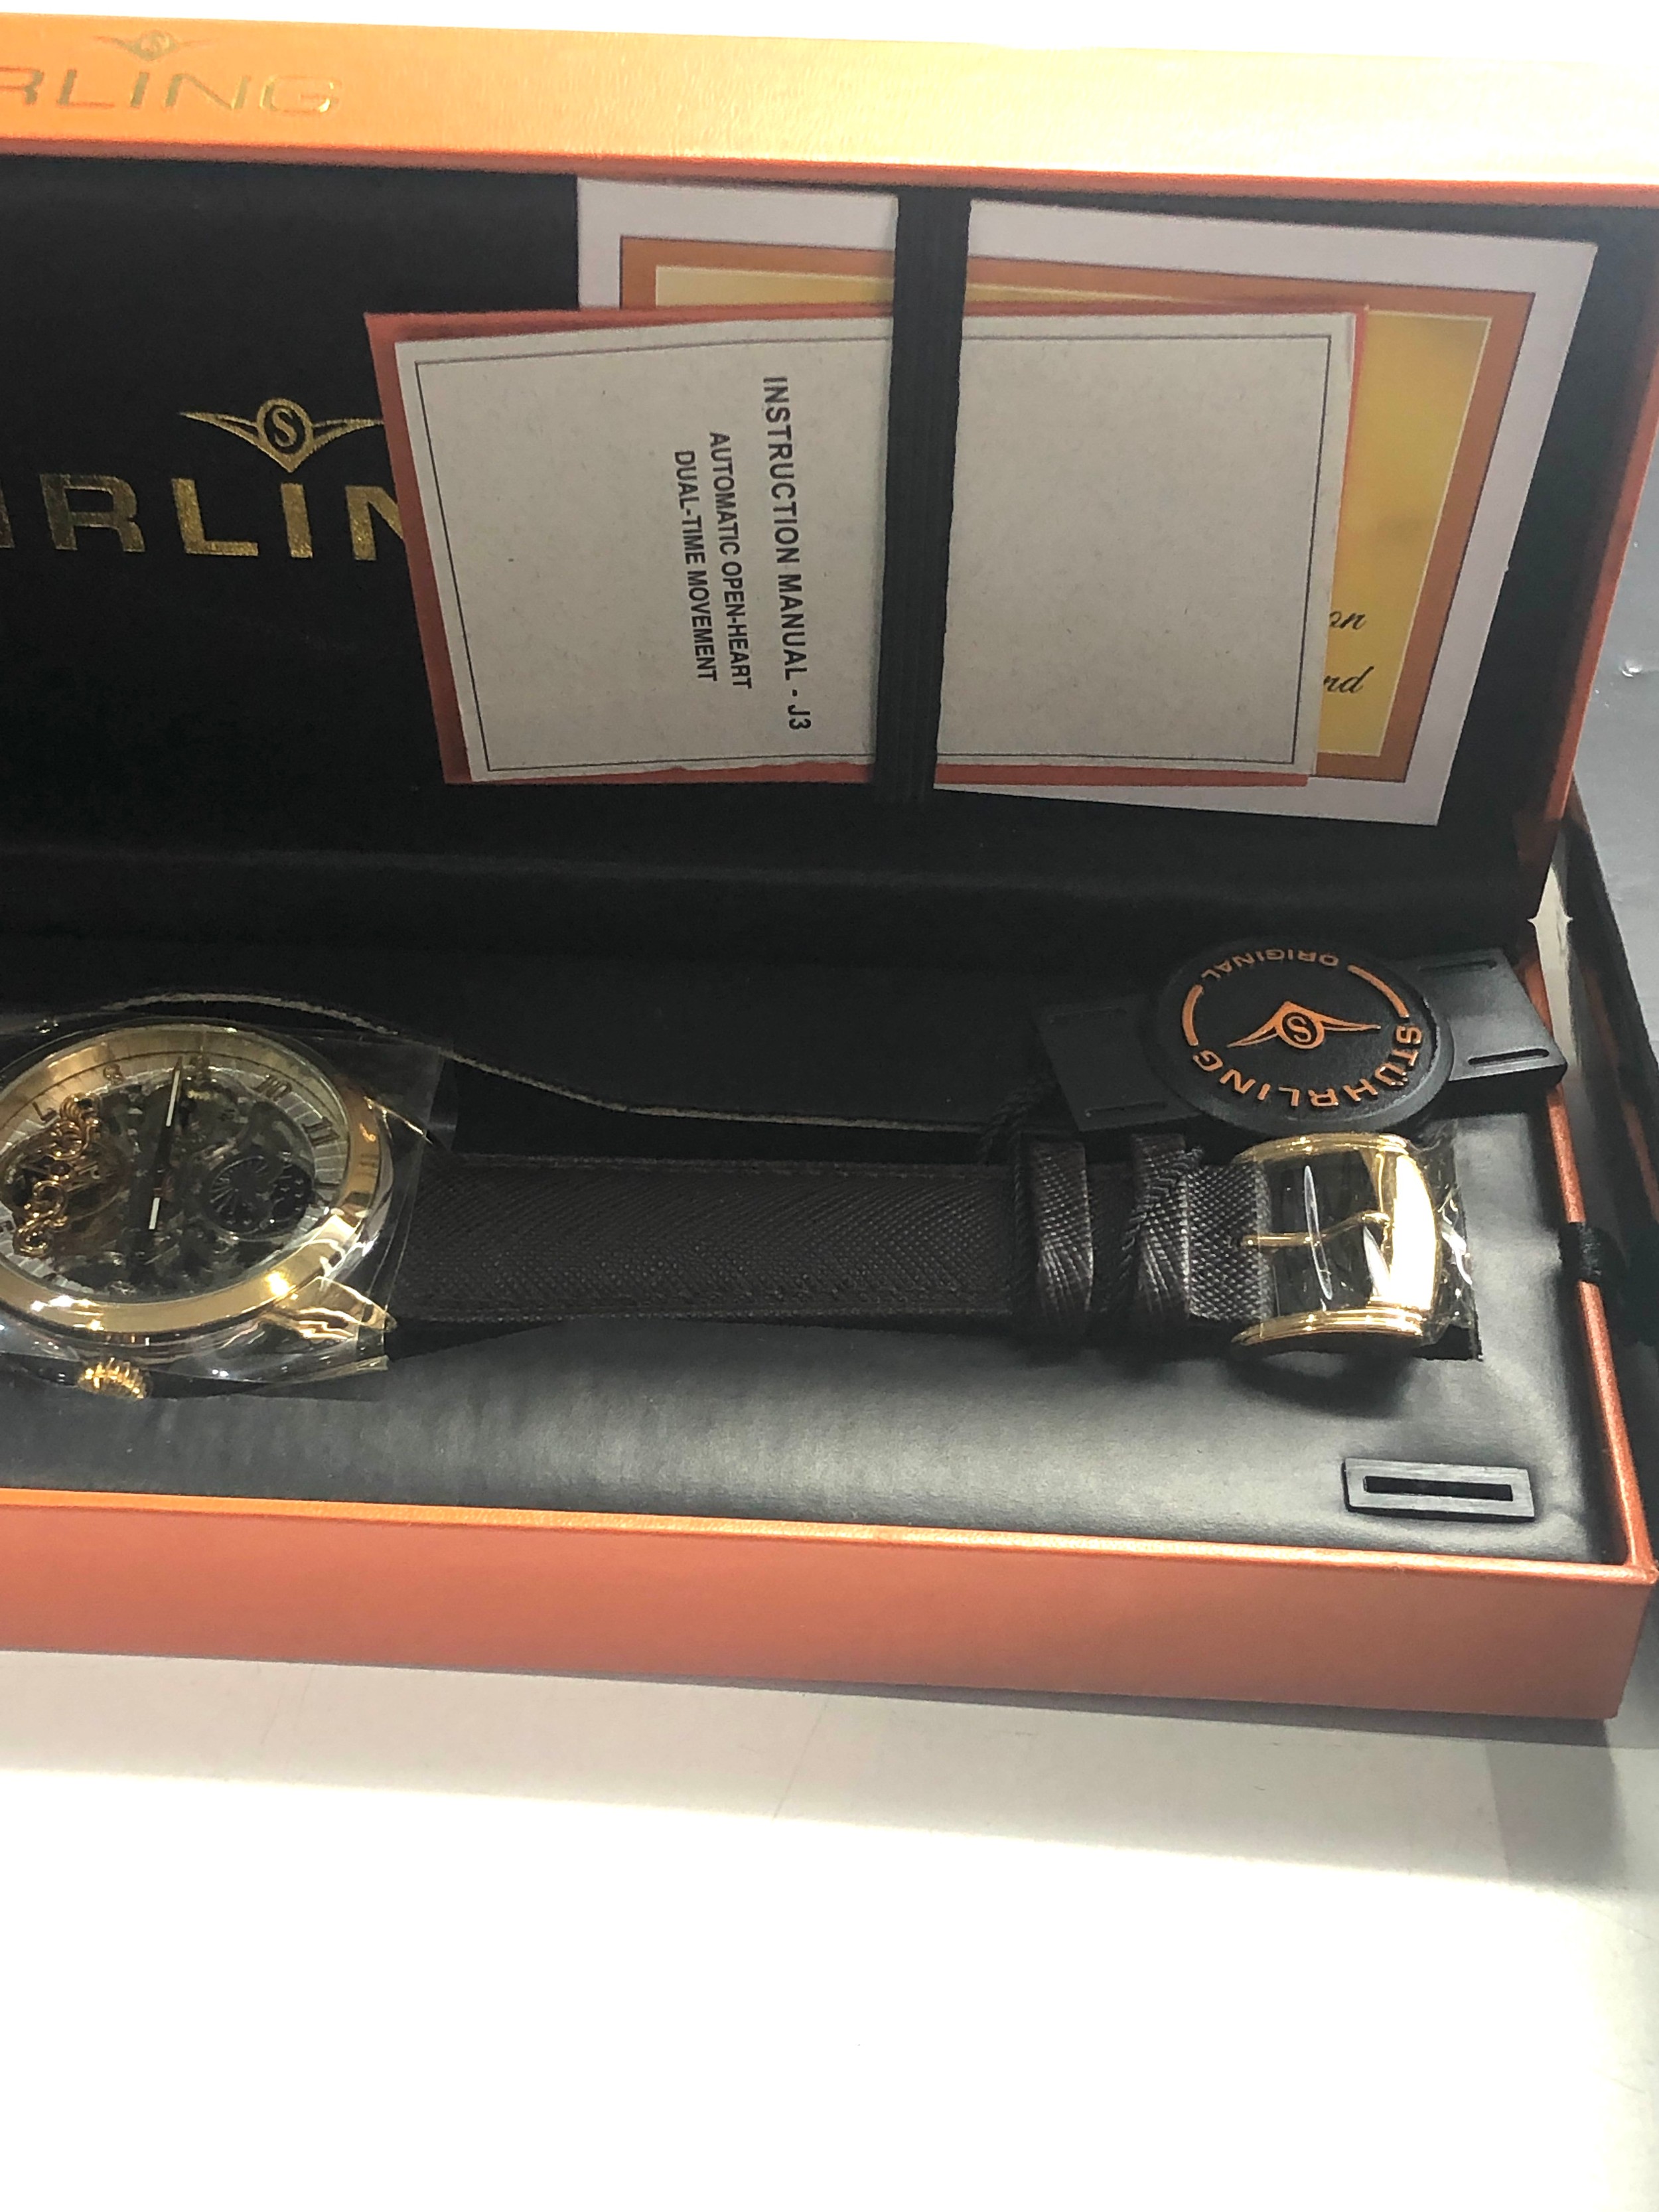 As new gents stuhrling wristwatch watch automatic open heart dual time movement boxed with booklets - Image 6 of 8